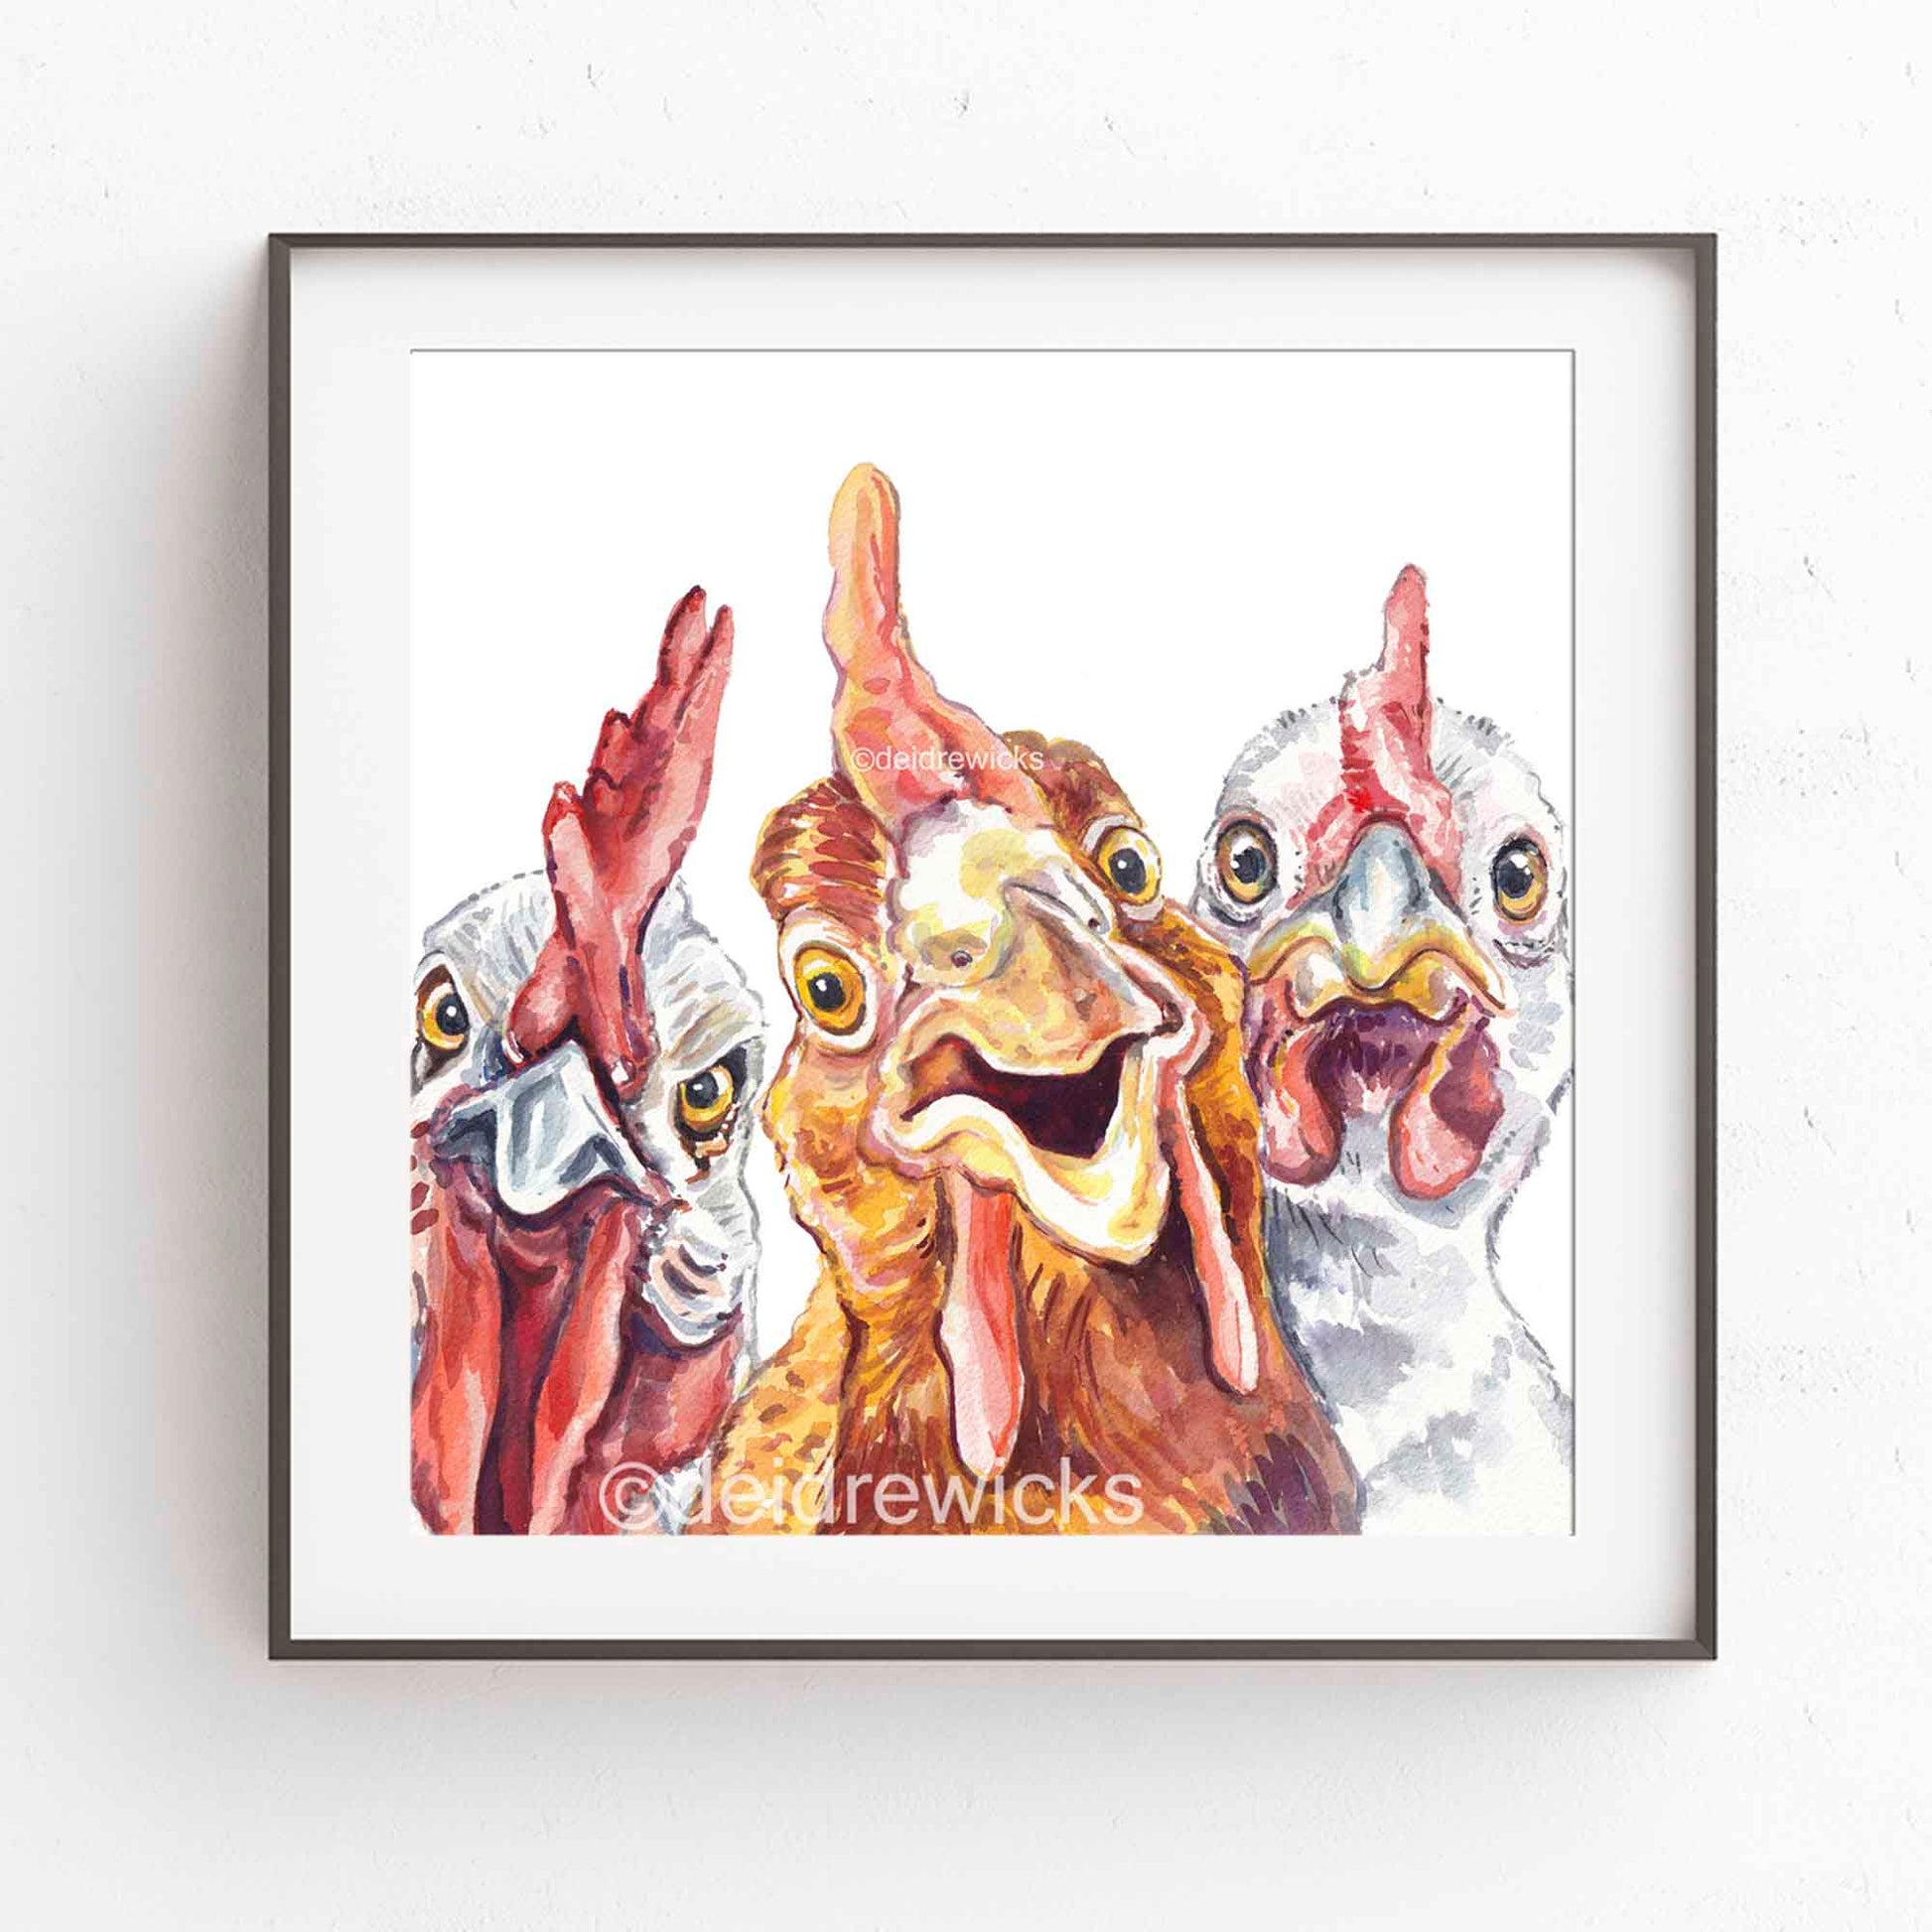 Framed example of a chicken watercolour painting print by Deidre Wicks